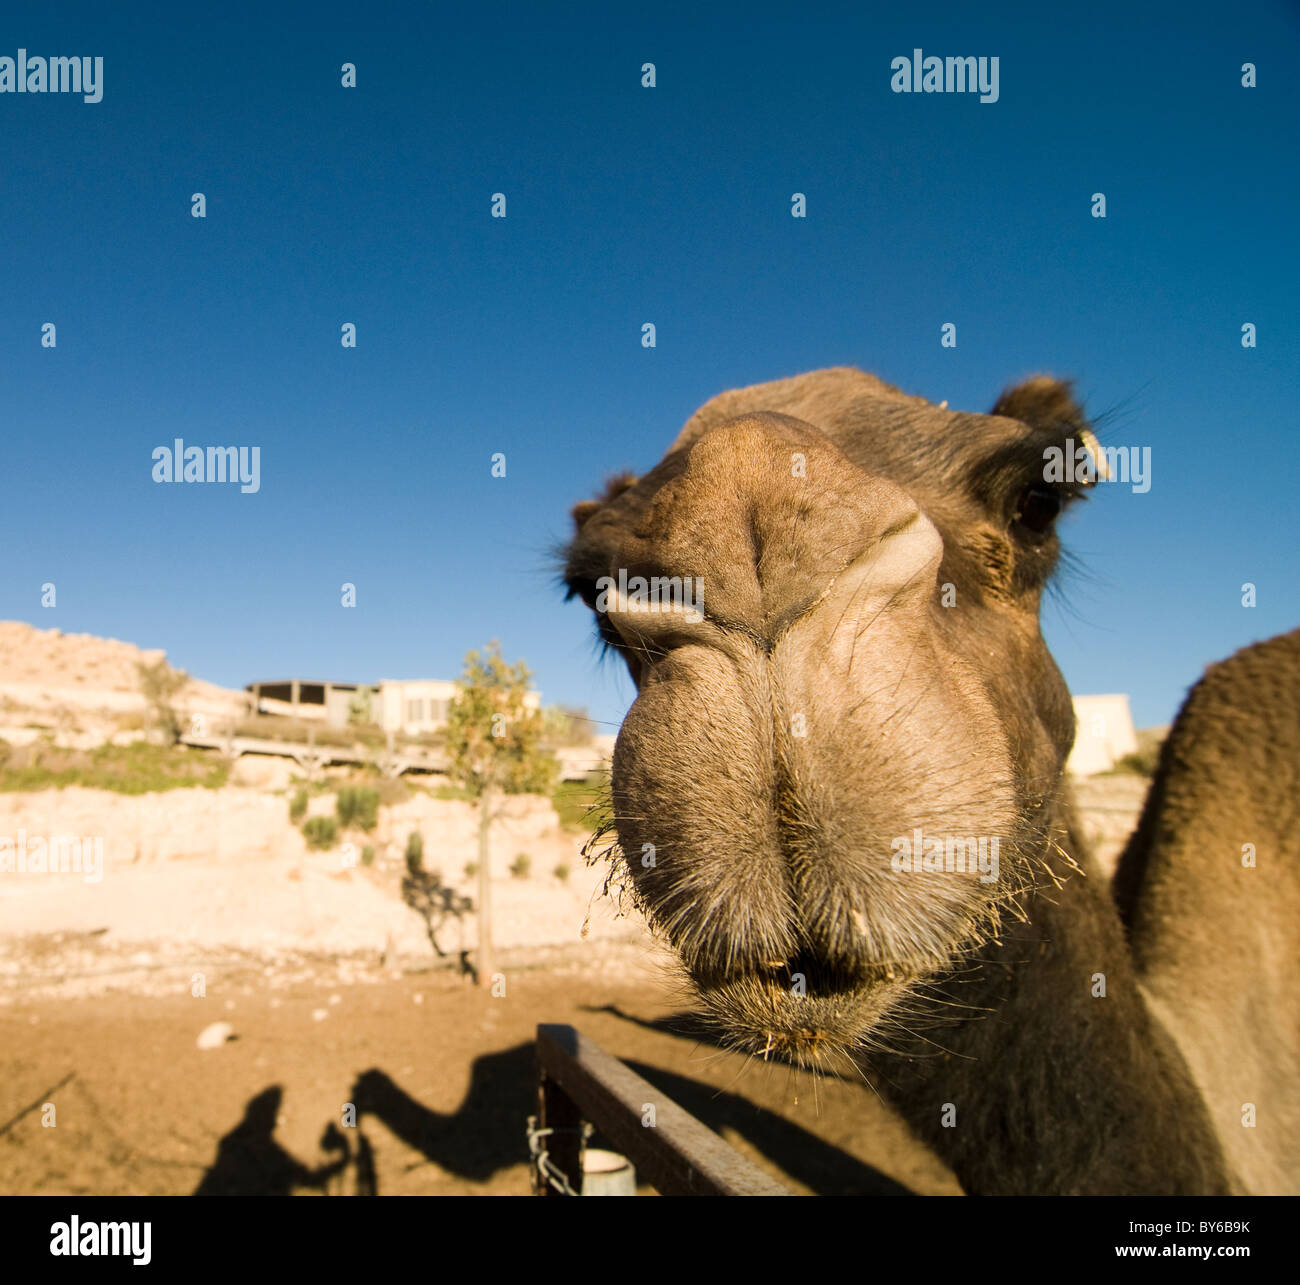 Funny faces! A dromedary camel in the Negev desert. Stock Photo